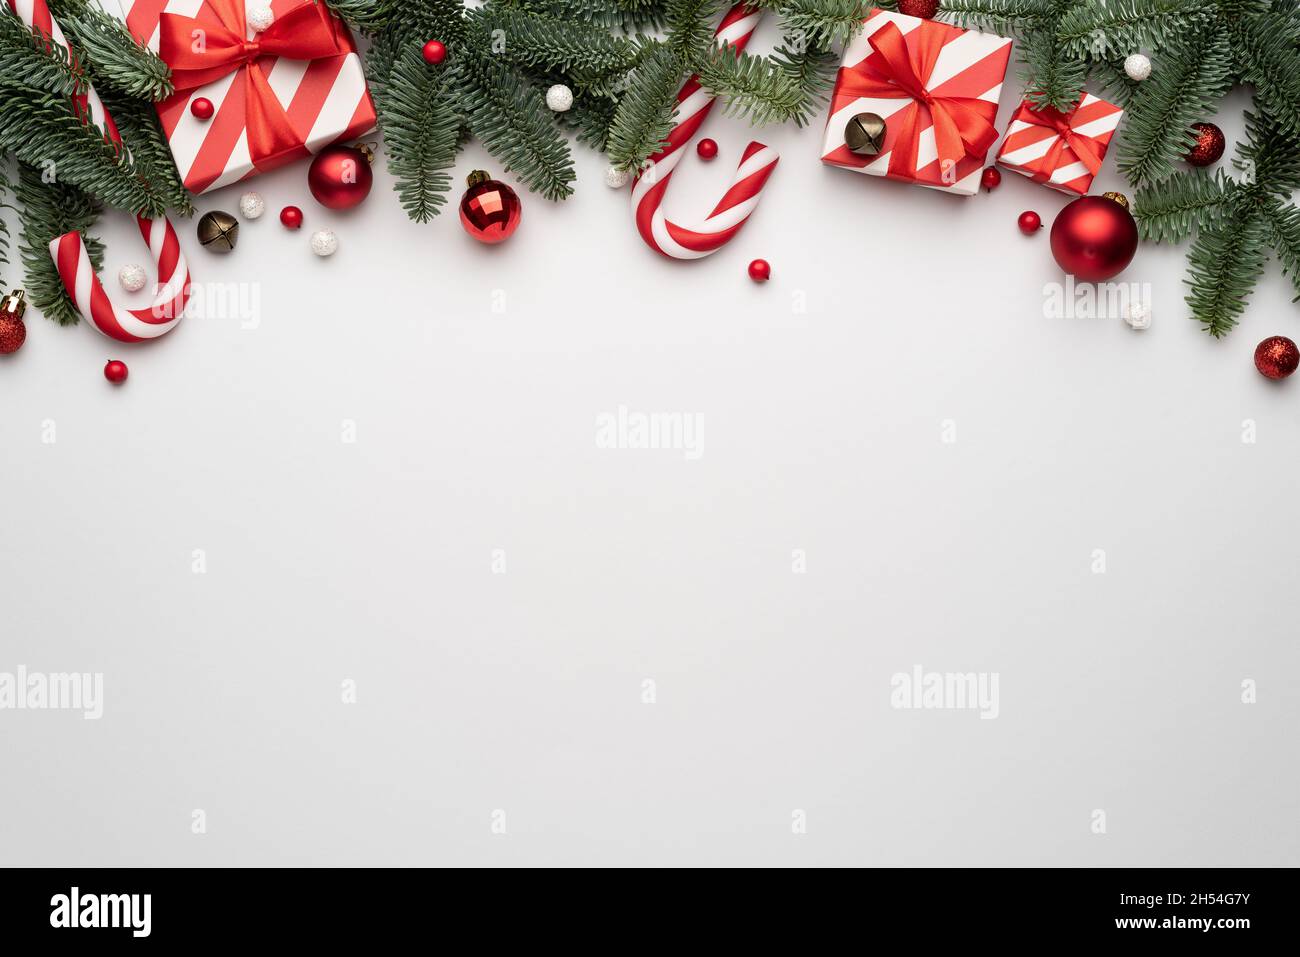 Christmas border on white background. Top view and flat lay with copy space for invitation text Stock Photo